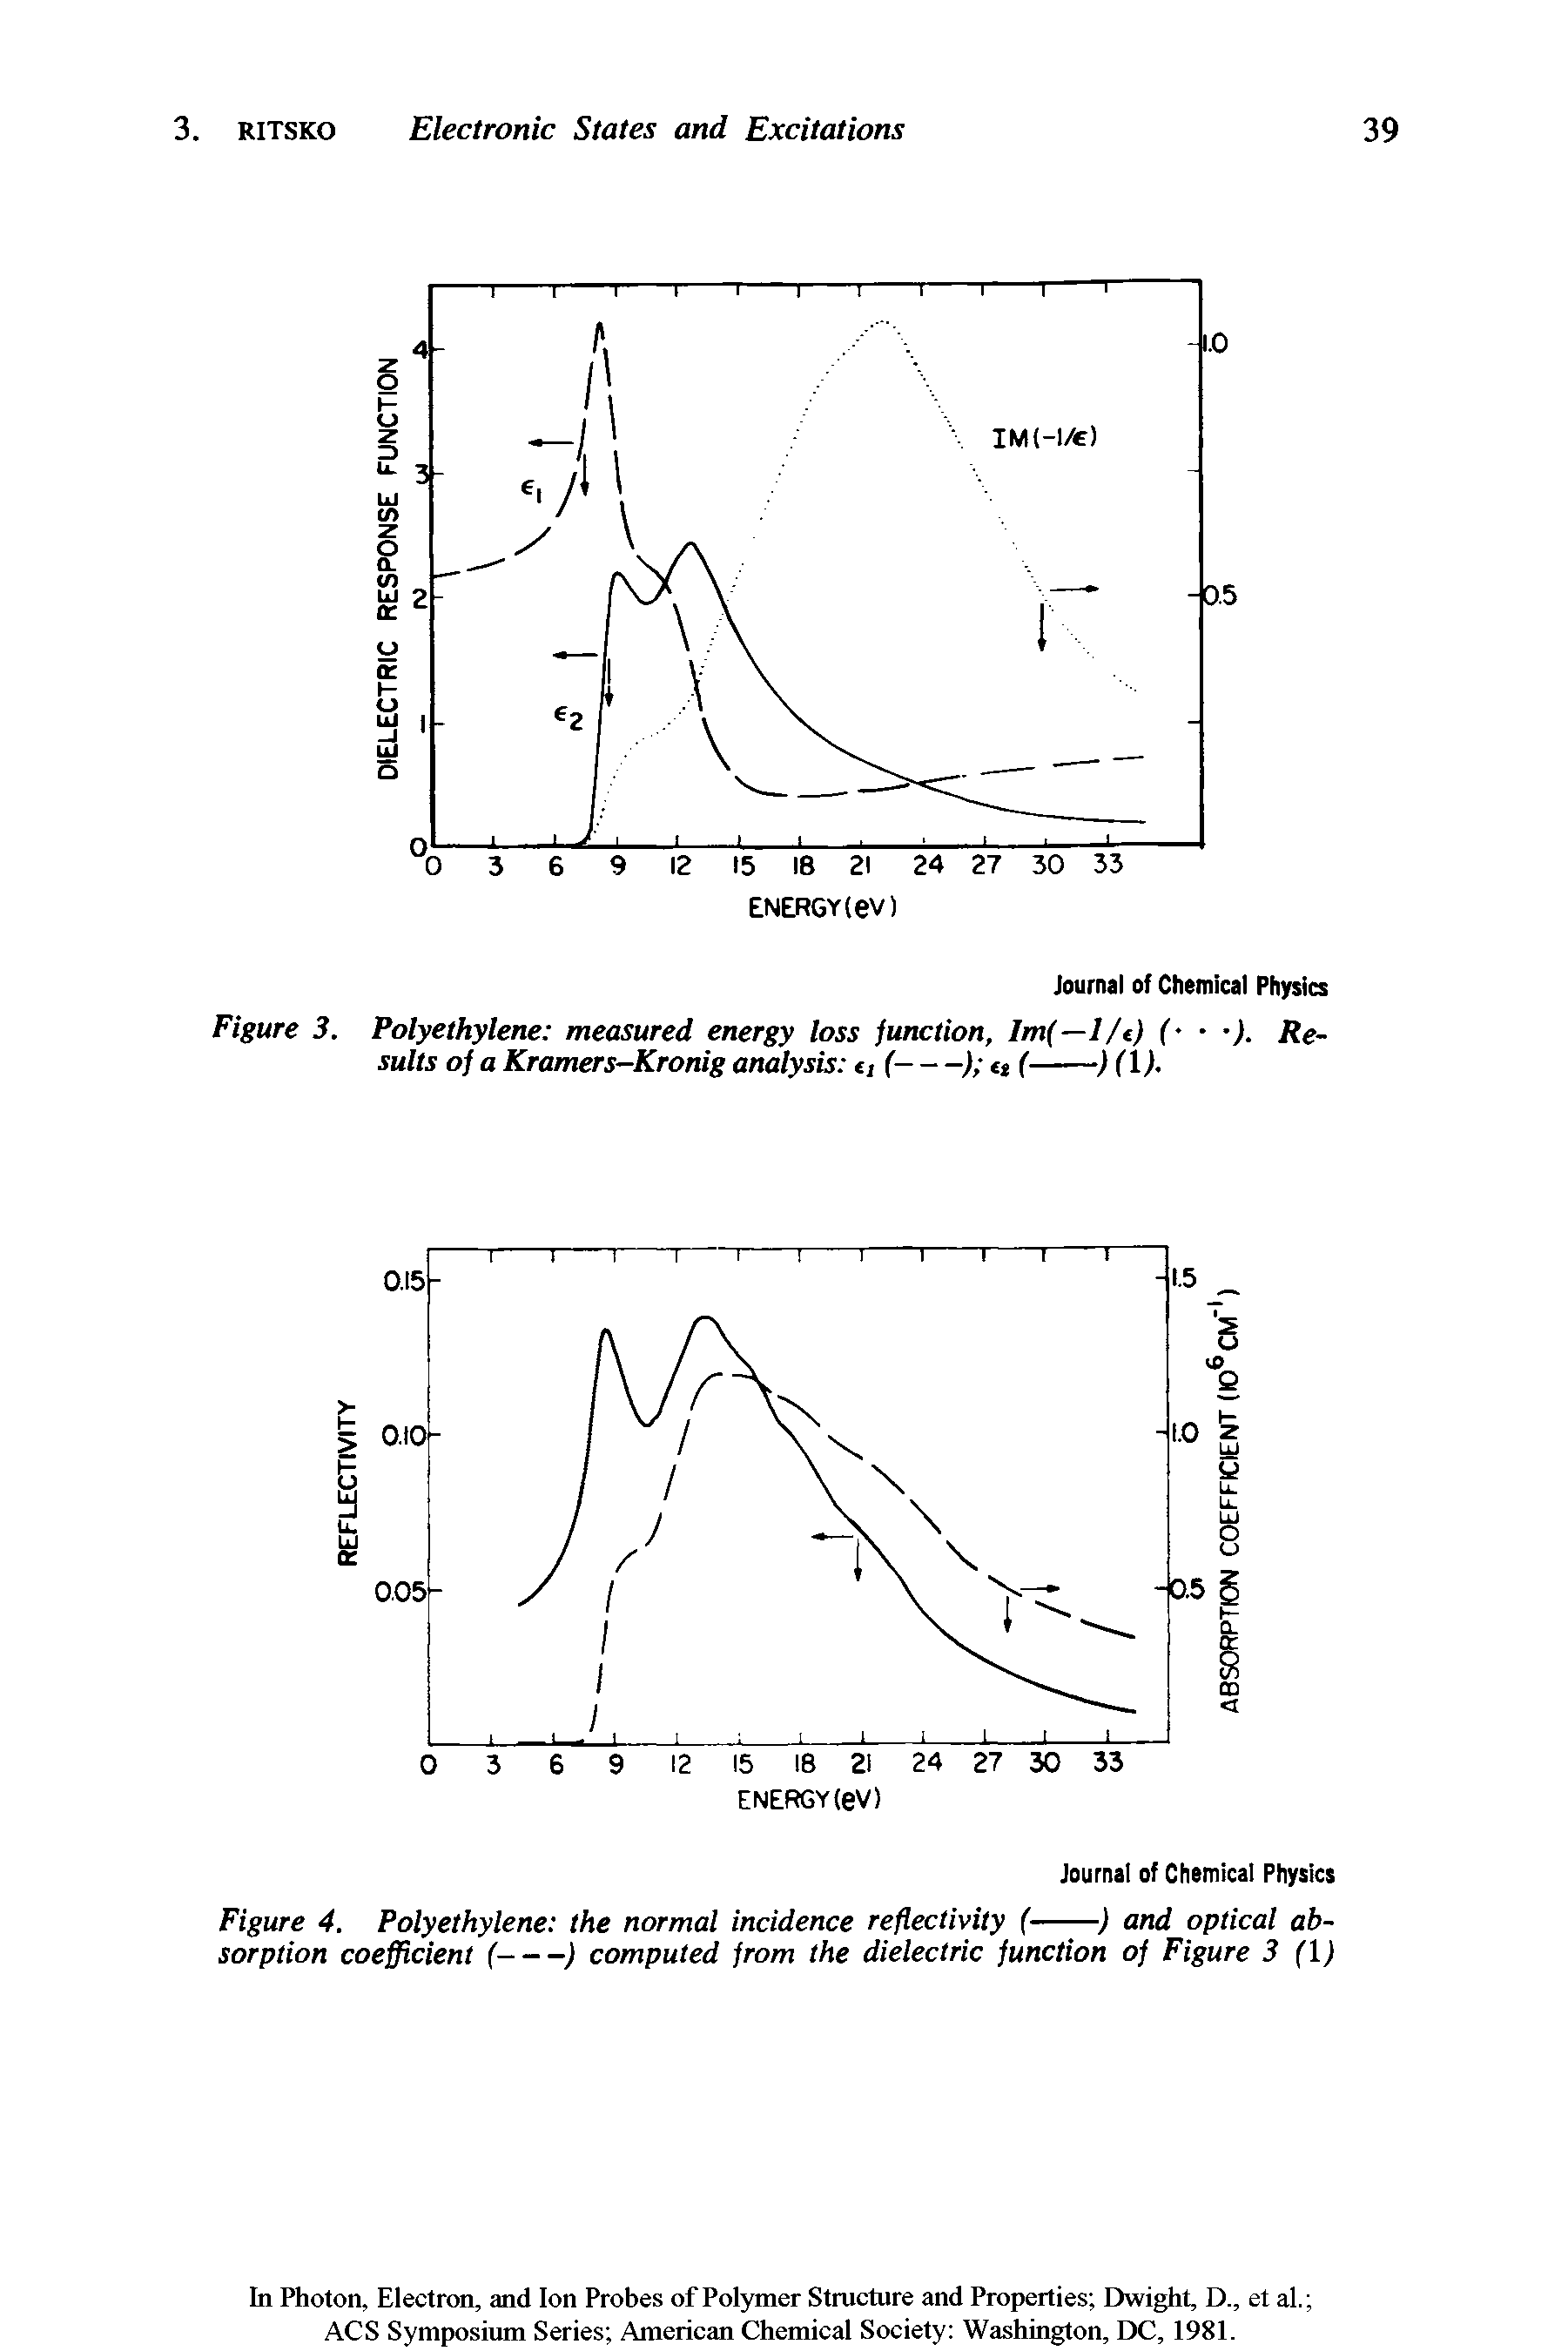 Figure 4. Polyethylene the normal incidence reflectivity (----------) and optical absorption coefficient (-----) computed from the dielectric function of Figure 3 (1)...